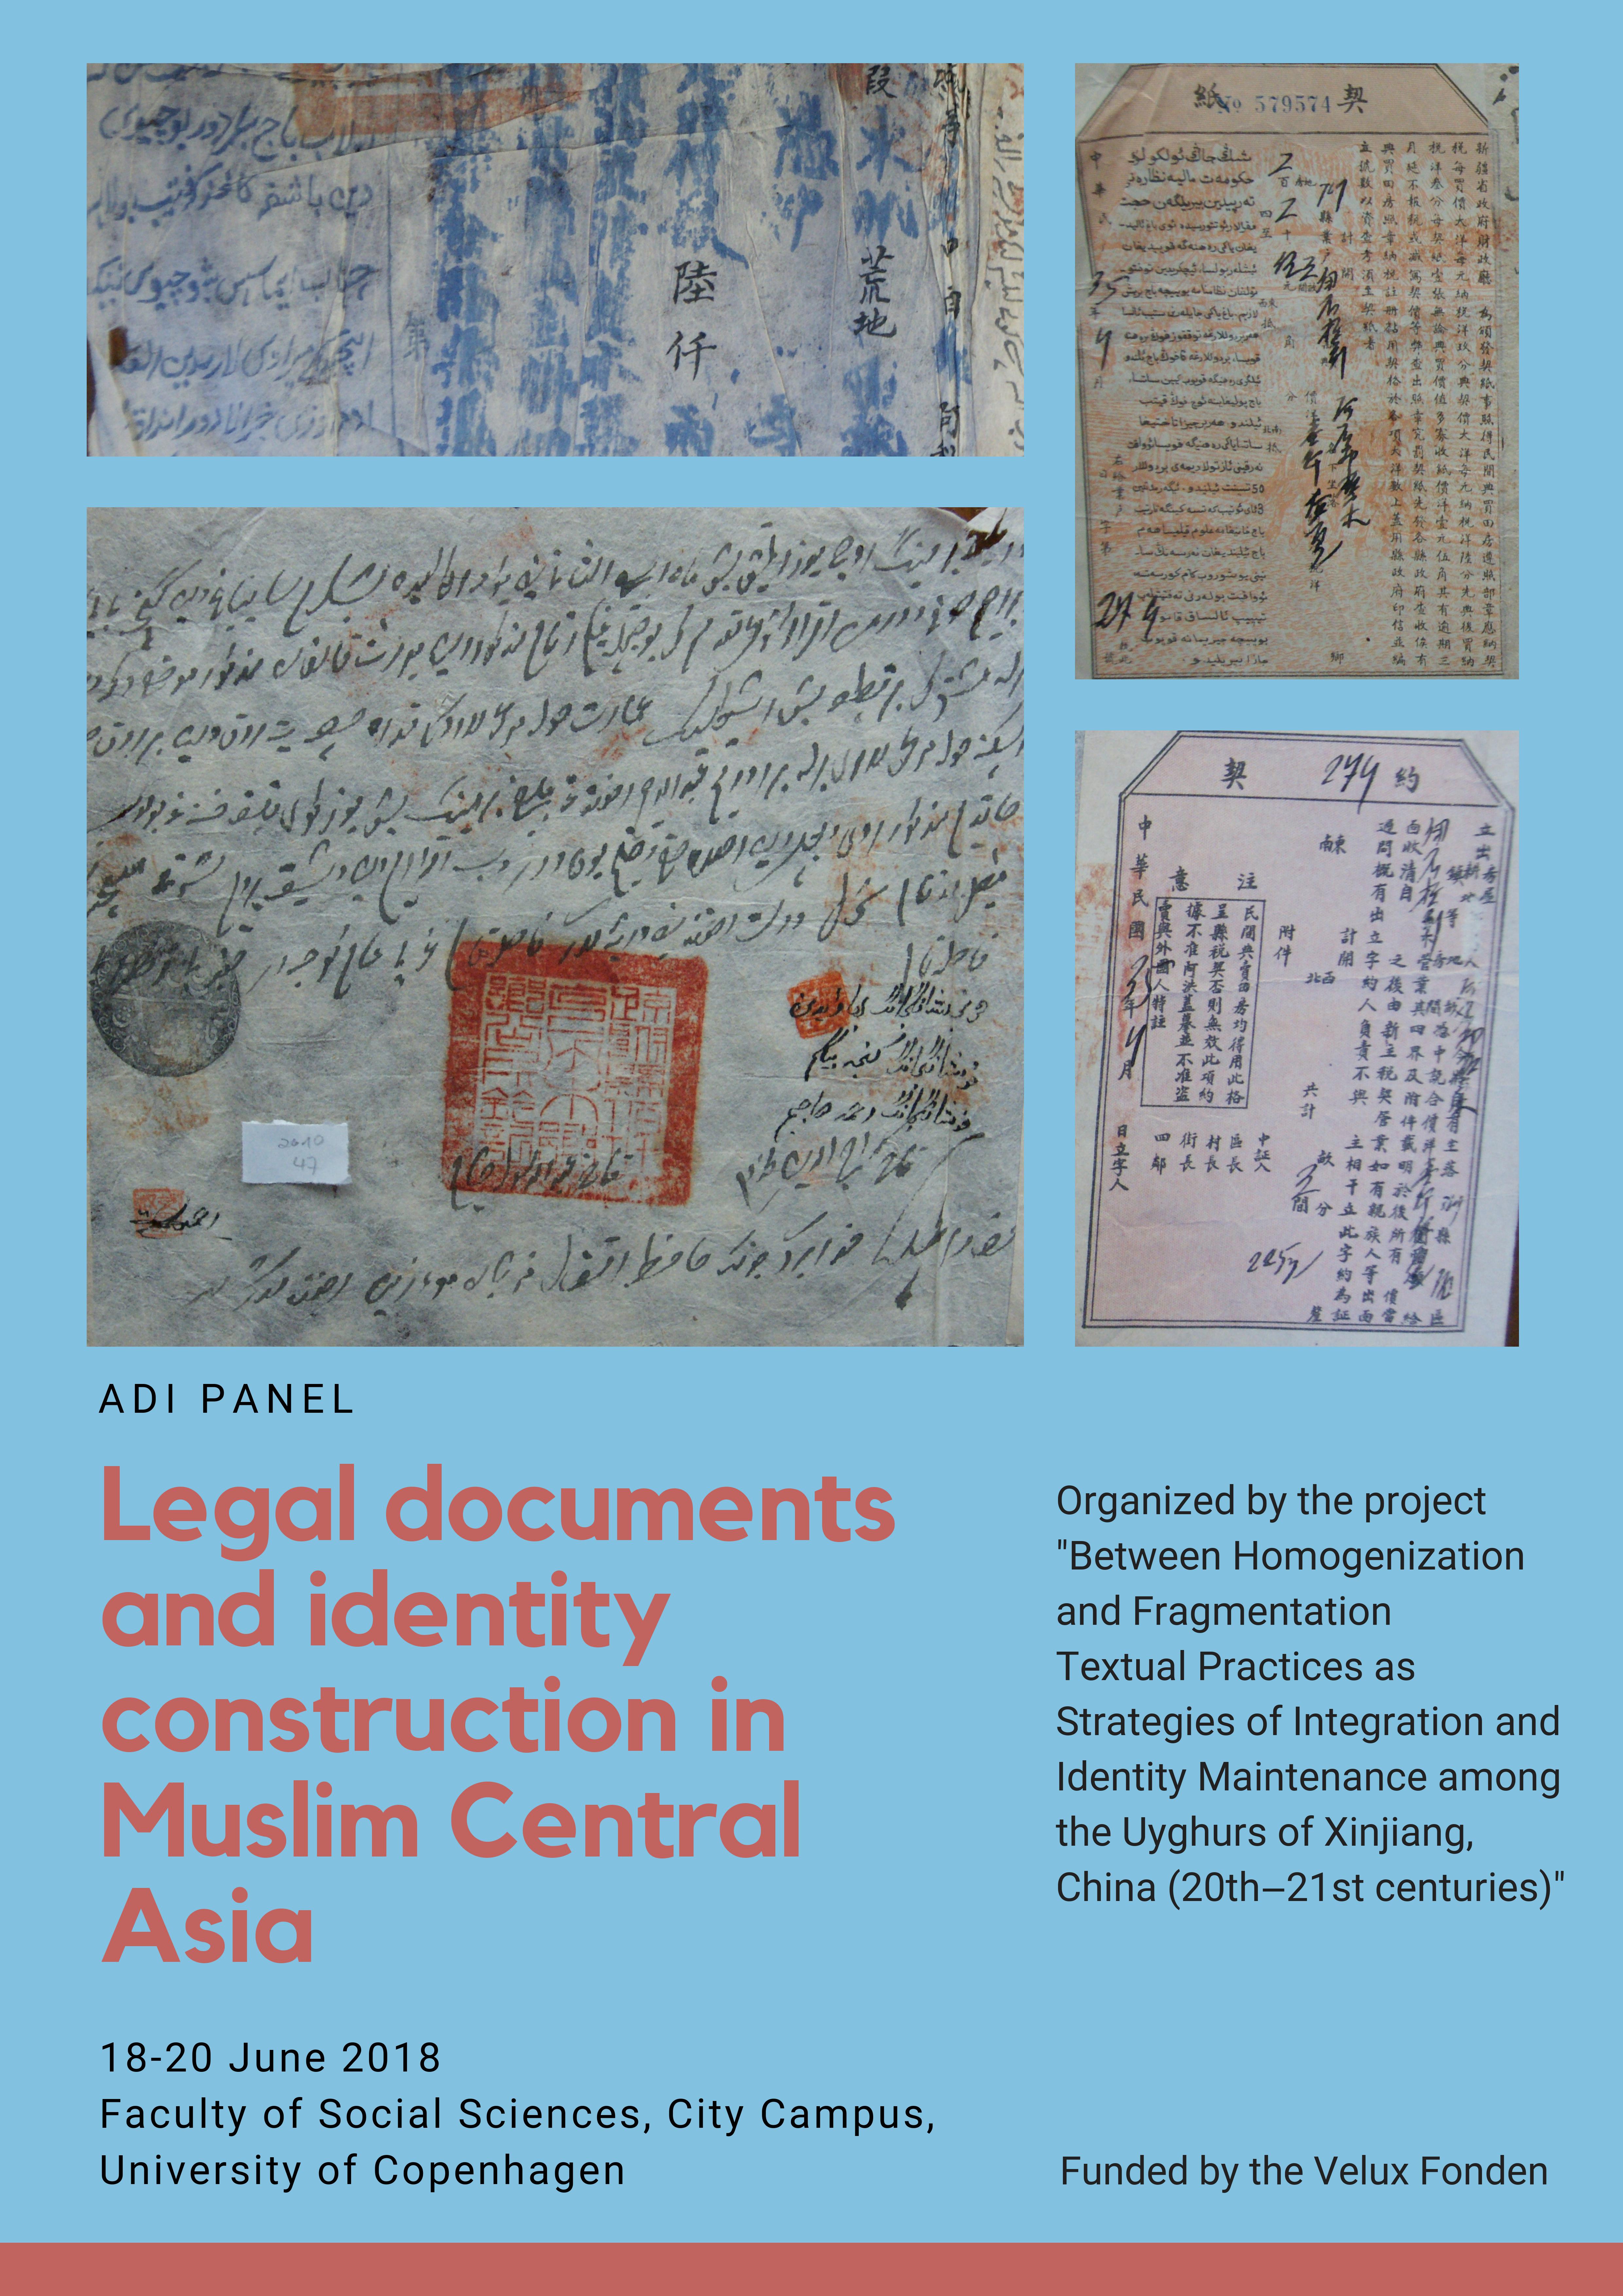 Workshop flyer - Legal documents and identity construction in Muslim Central Asia